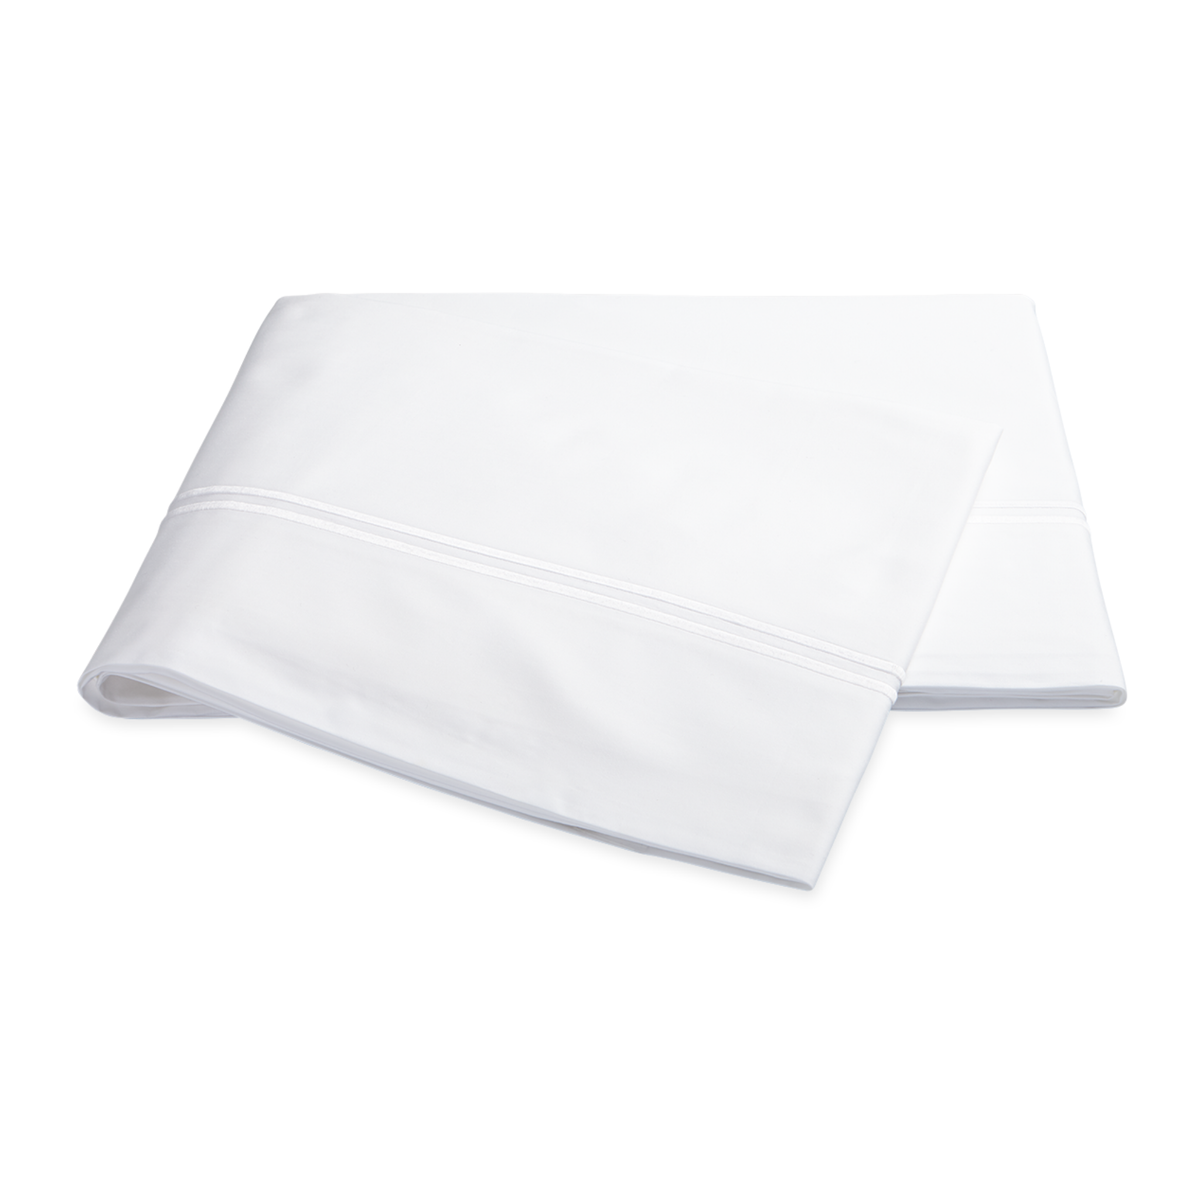 Flat Sheet of Matouk Sierra Bedding Collection in White Color